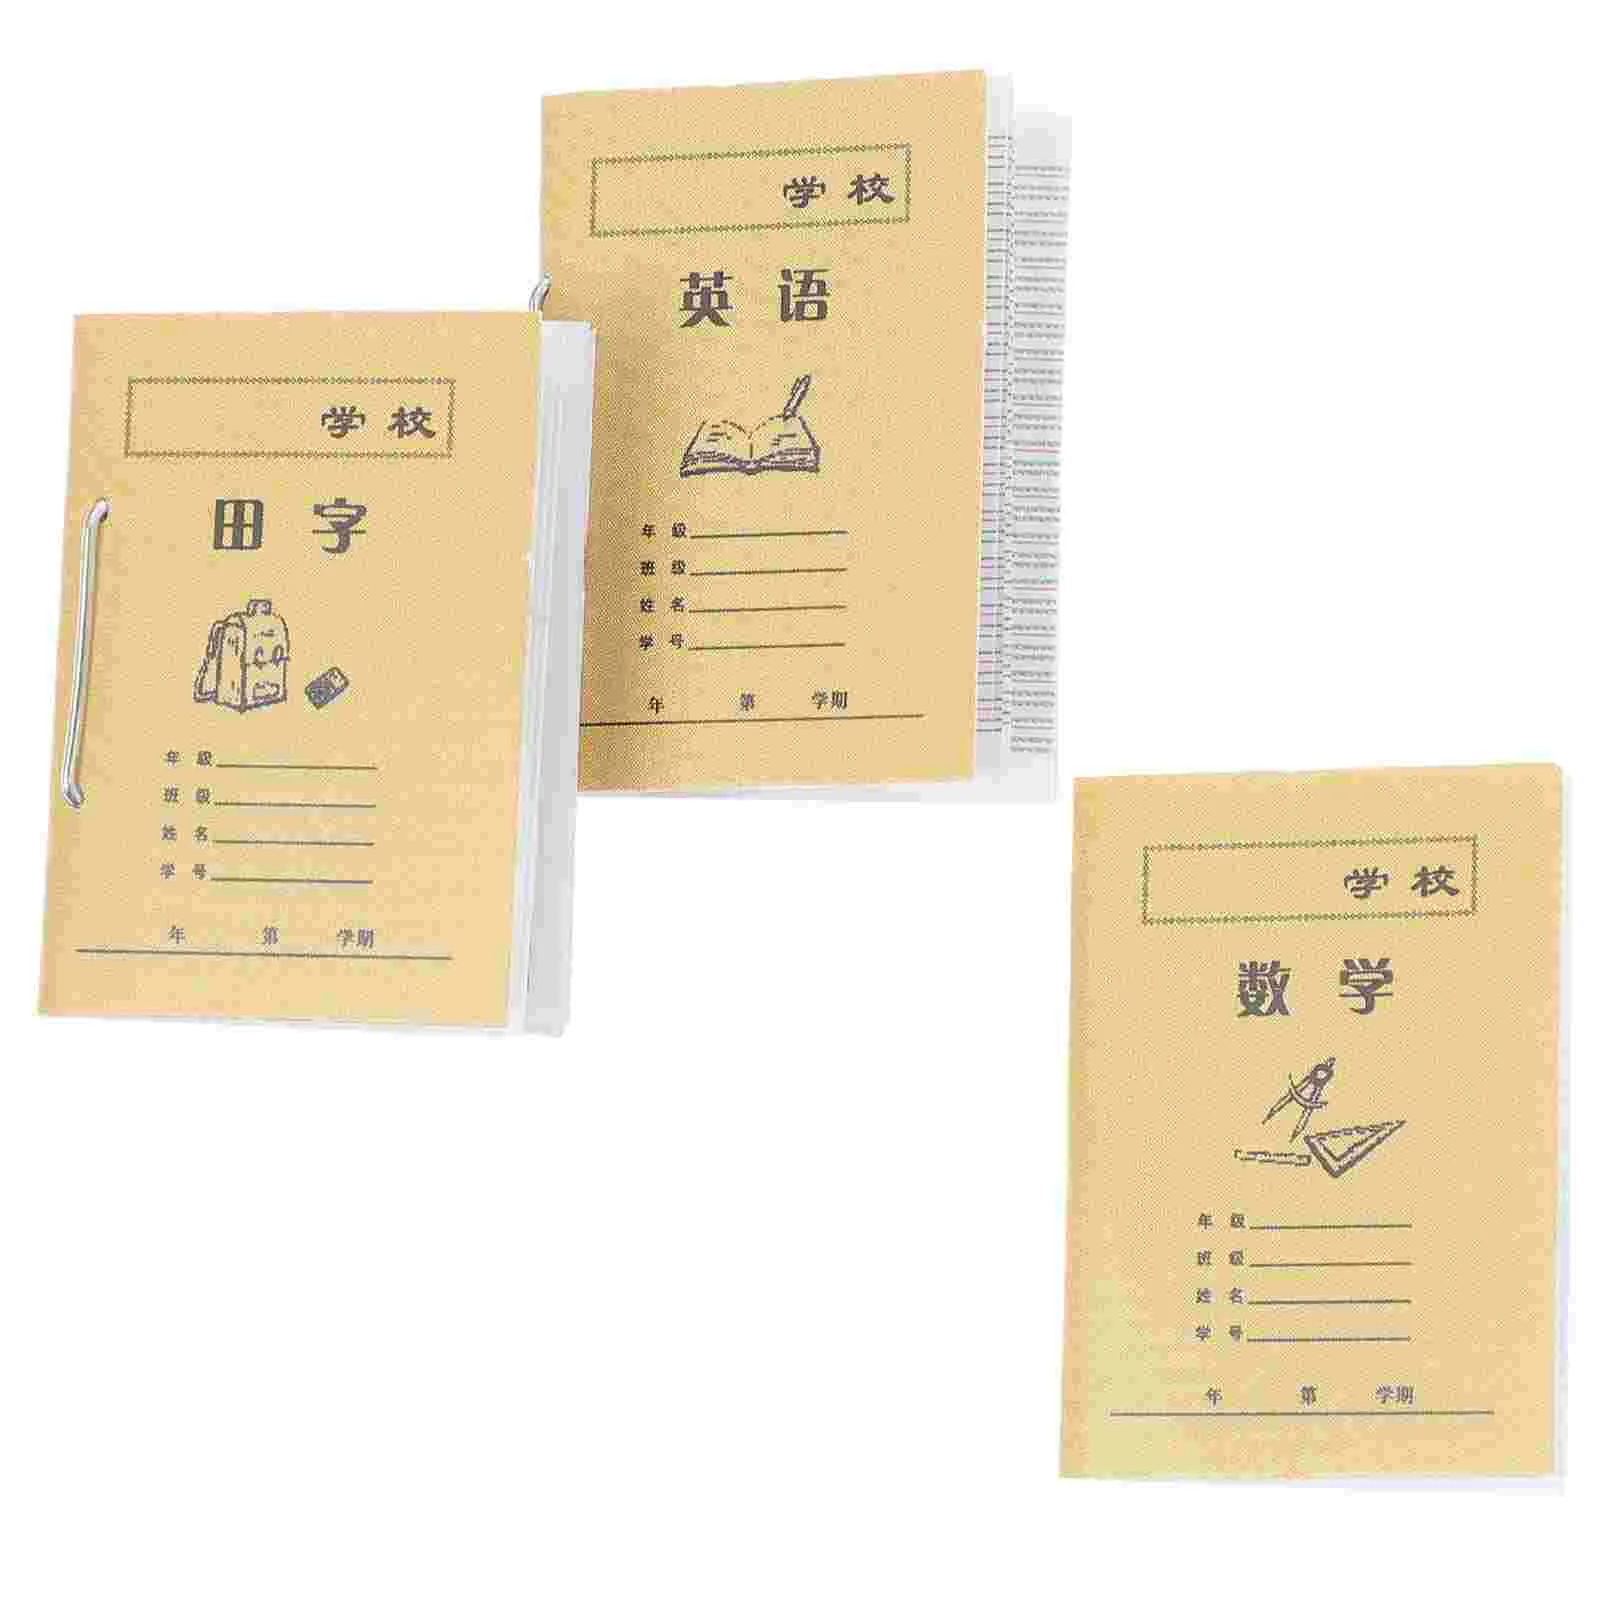 3 Pcs Houseate Miniature House Photo Prop Exercise Books Model Practice Toys Houseative Child beginner small regular script copybooks chinese poem soft pen copybook child basic brush pen calligraphy practice books